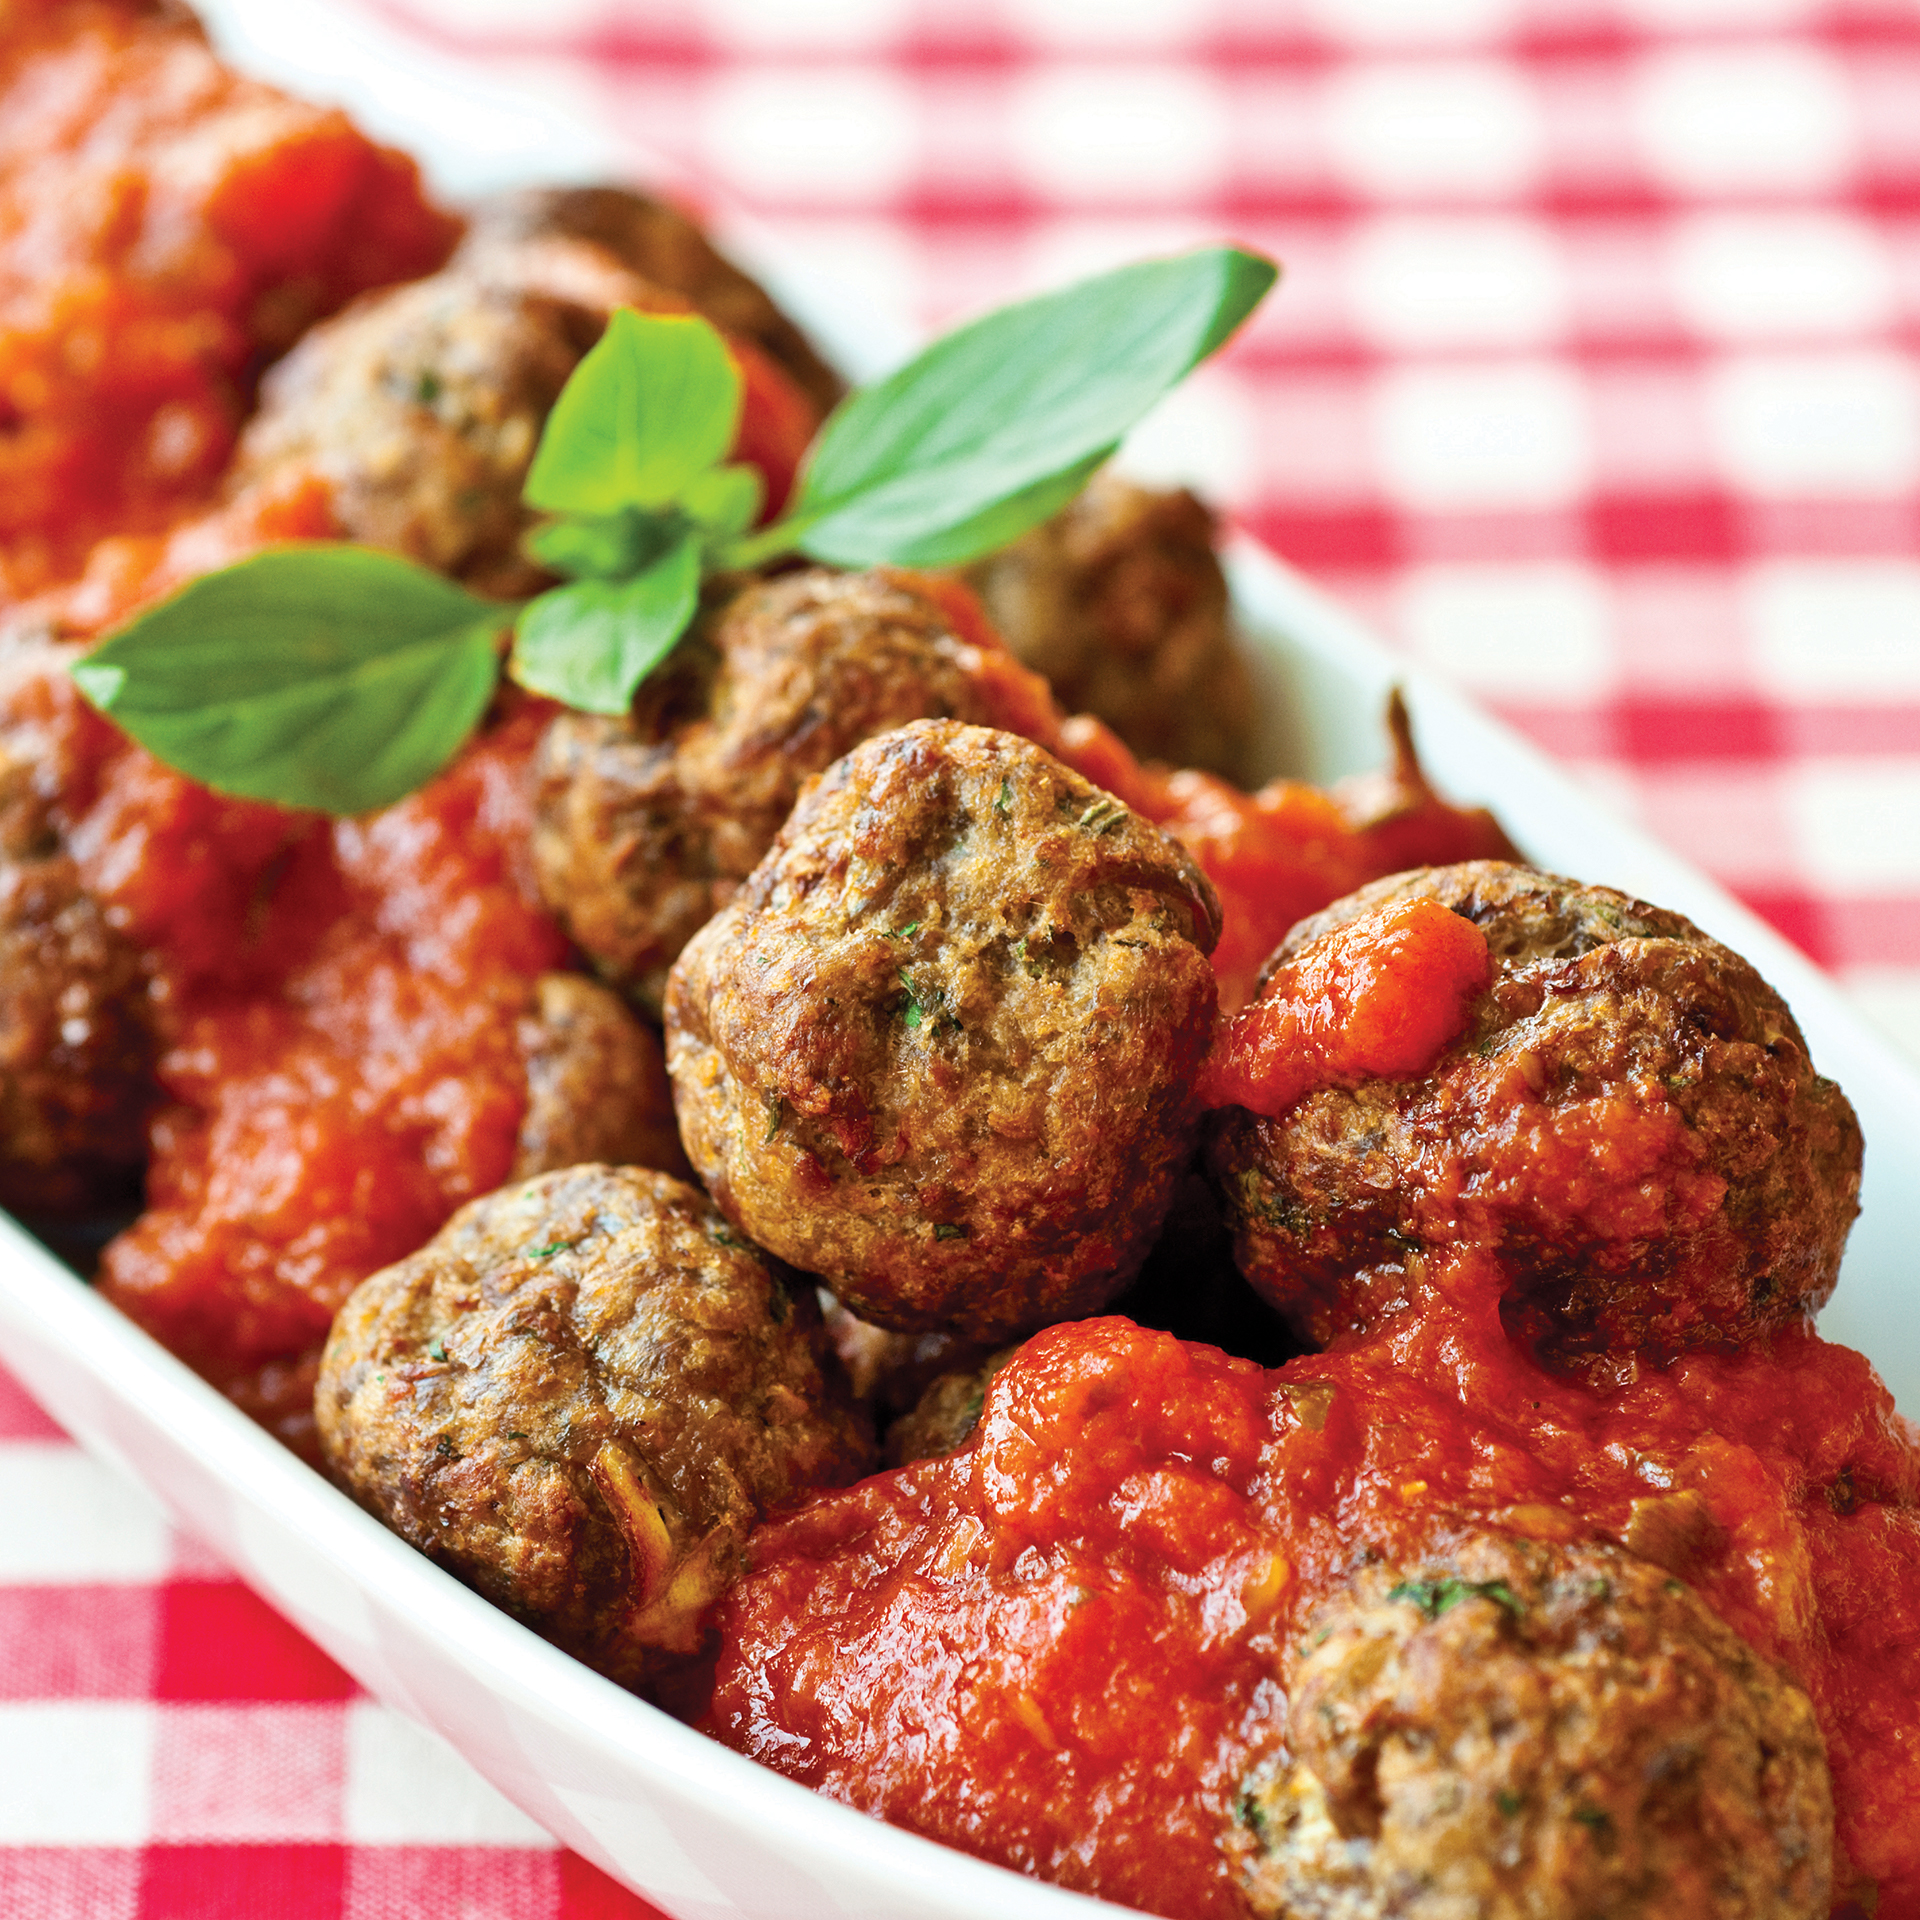 Fried meatballs in tomato sauce